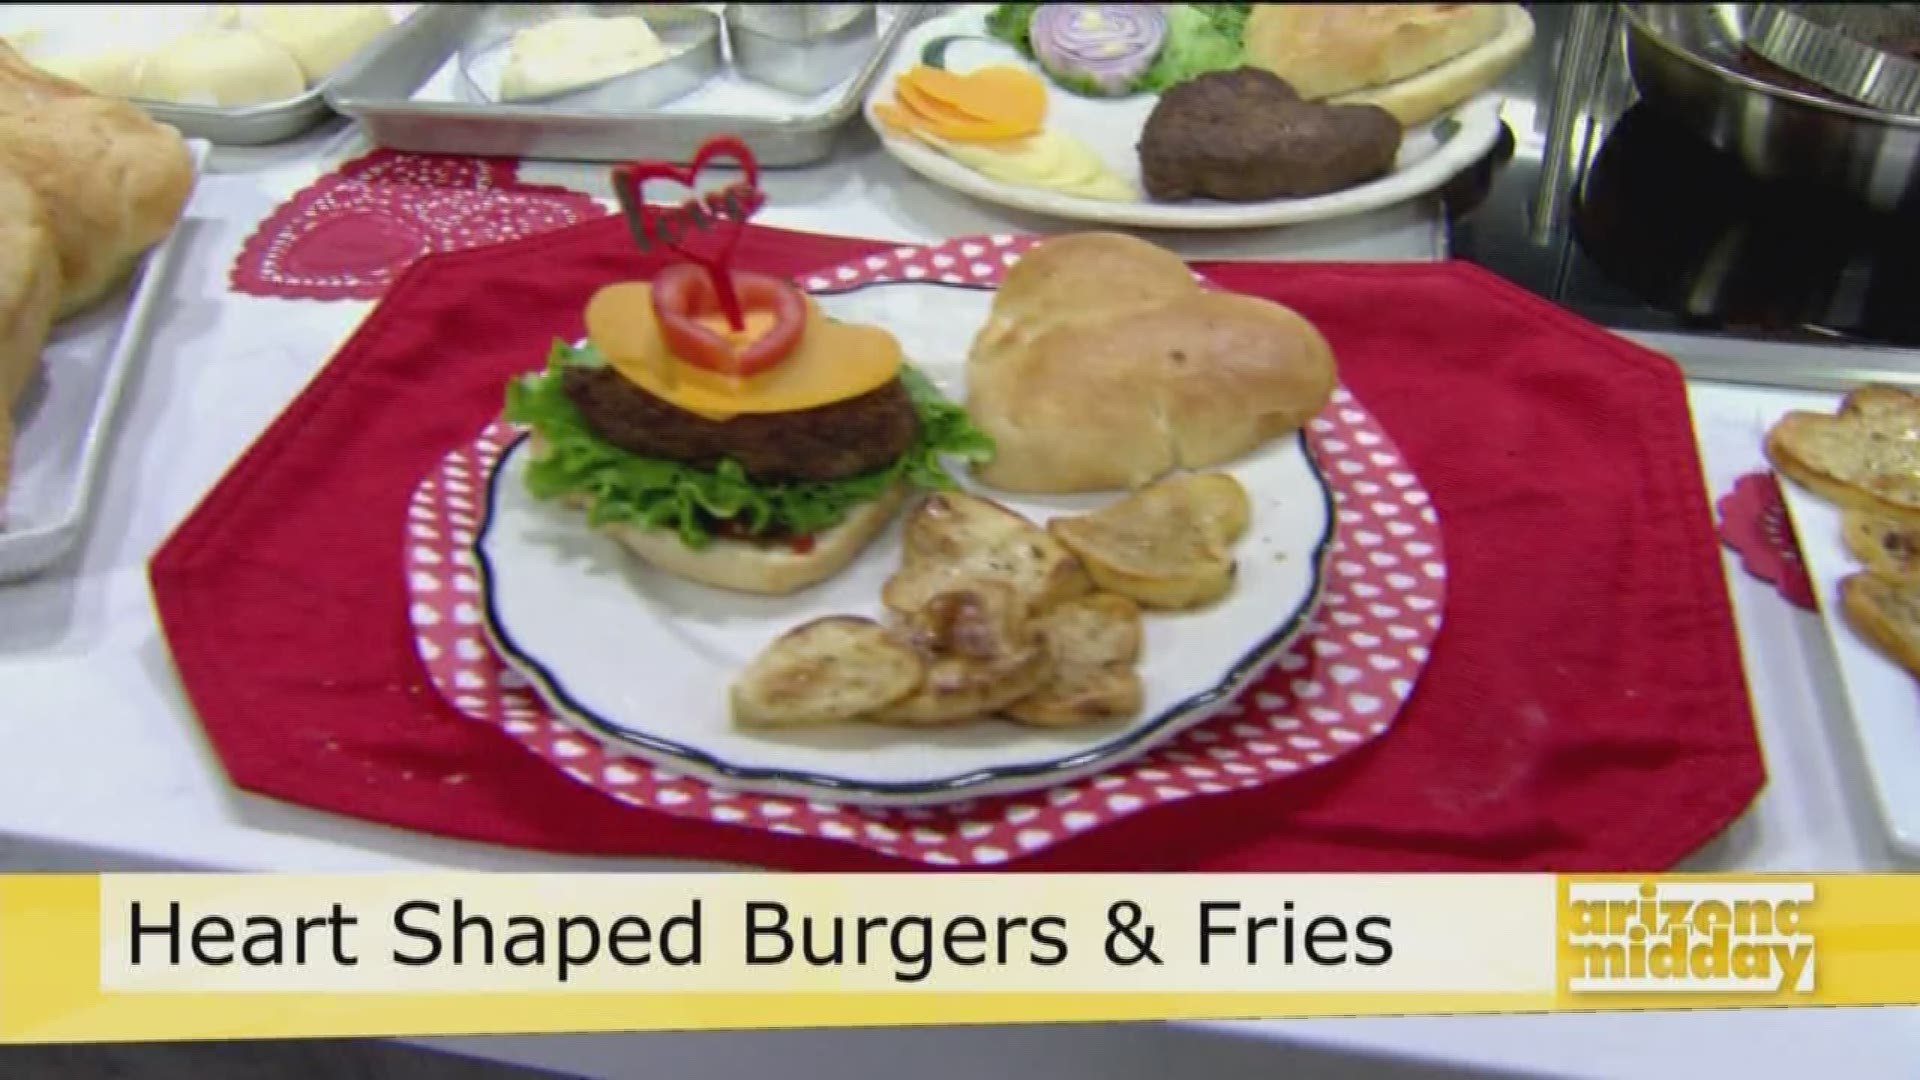 We've got a valentine's day meal your kids will love! Jan shows us the easy way you can make heart shaped burgers and fries.